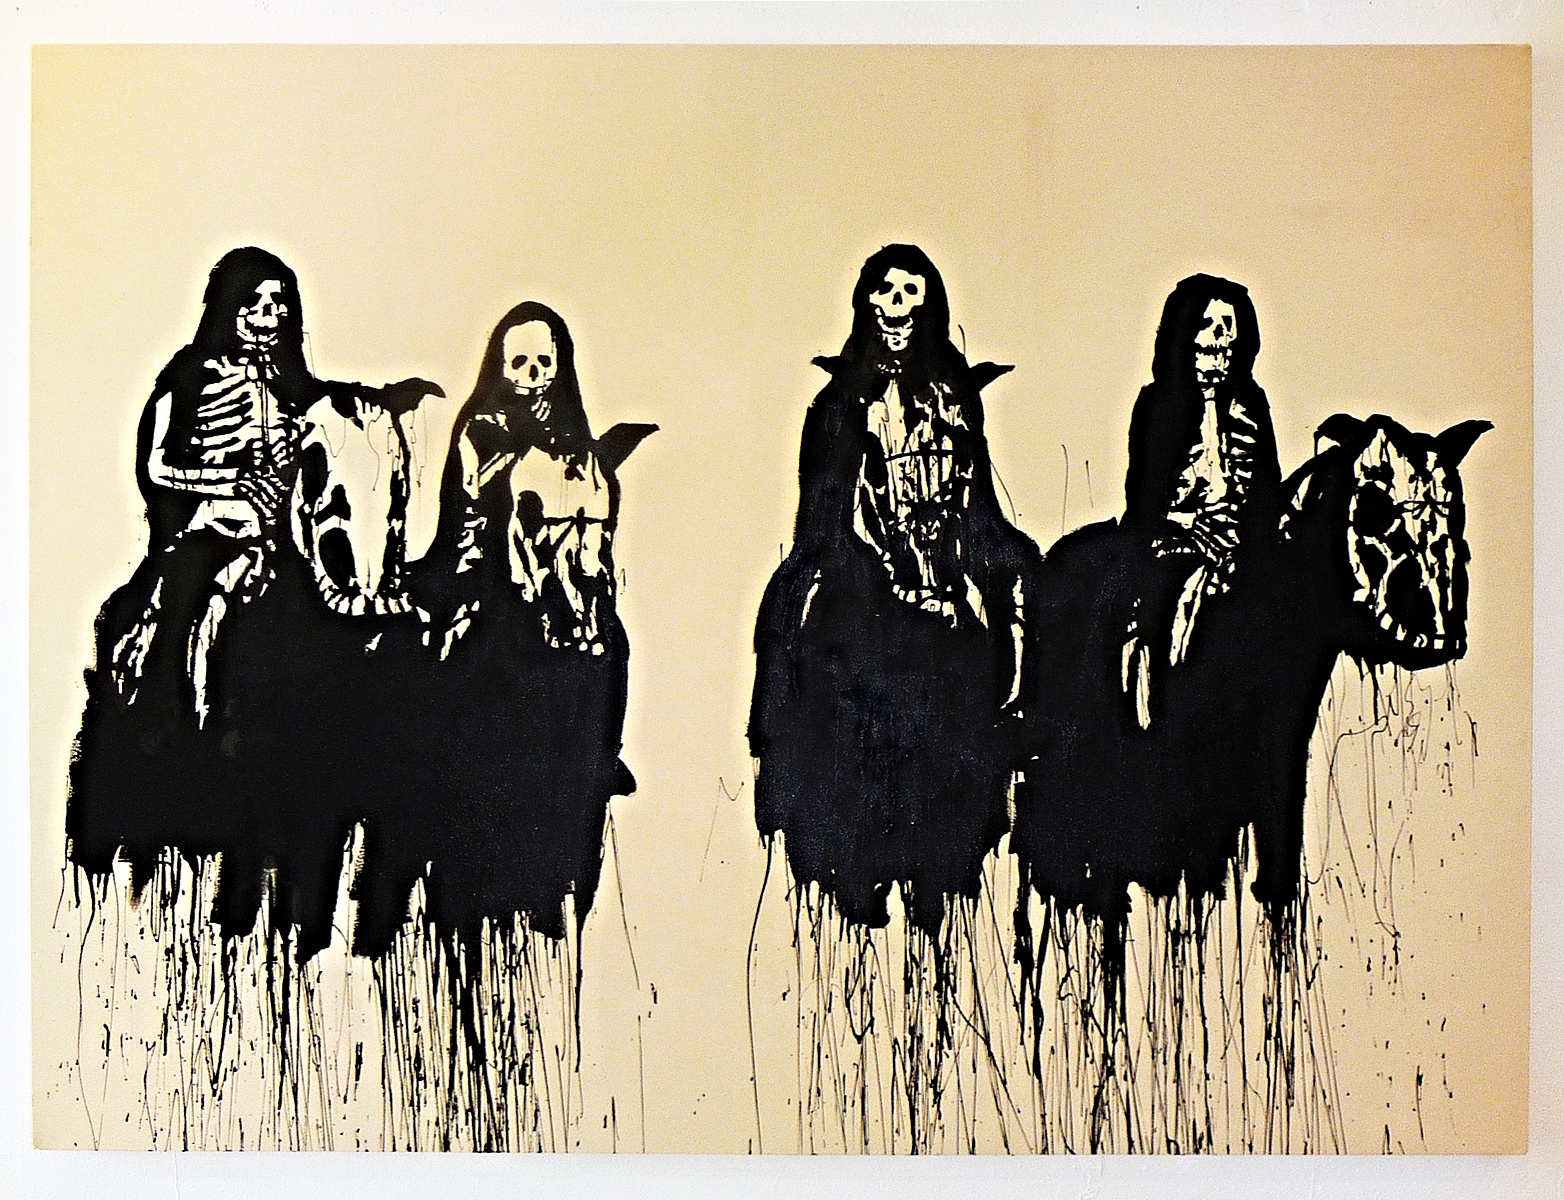   Four Horsemen,  2010 Oil on canvas 72 x 96 inches 